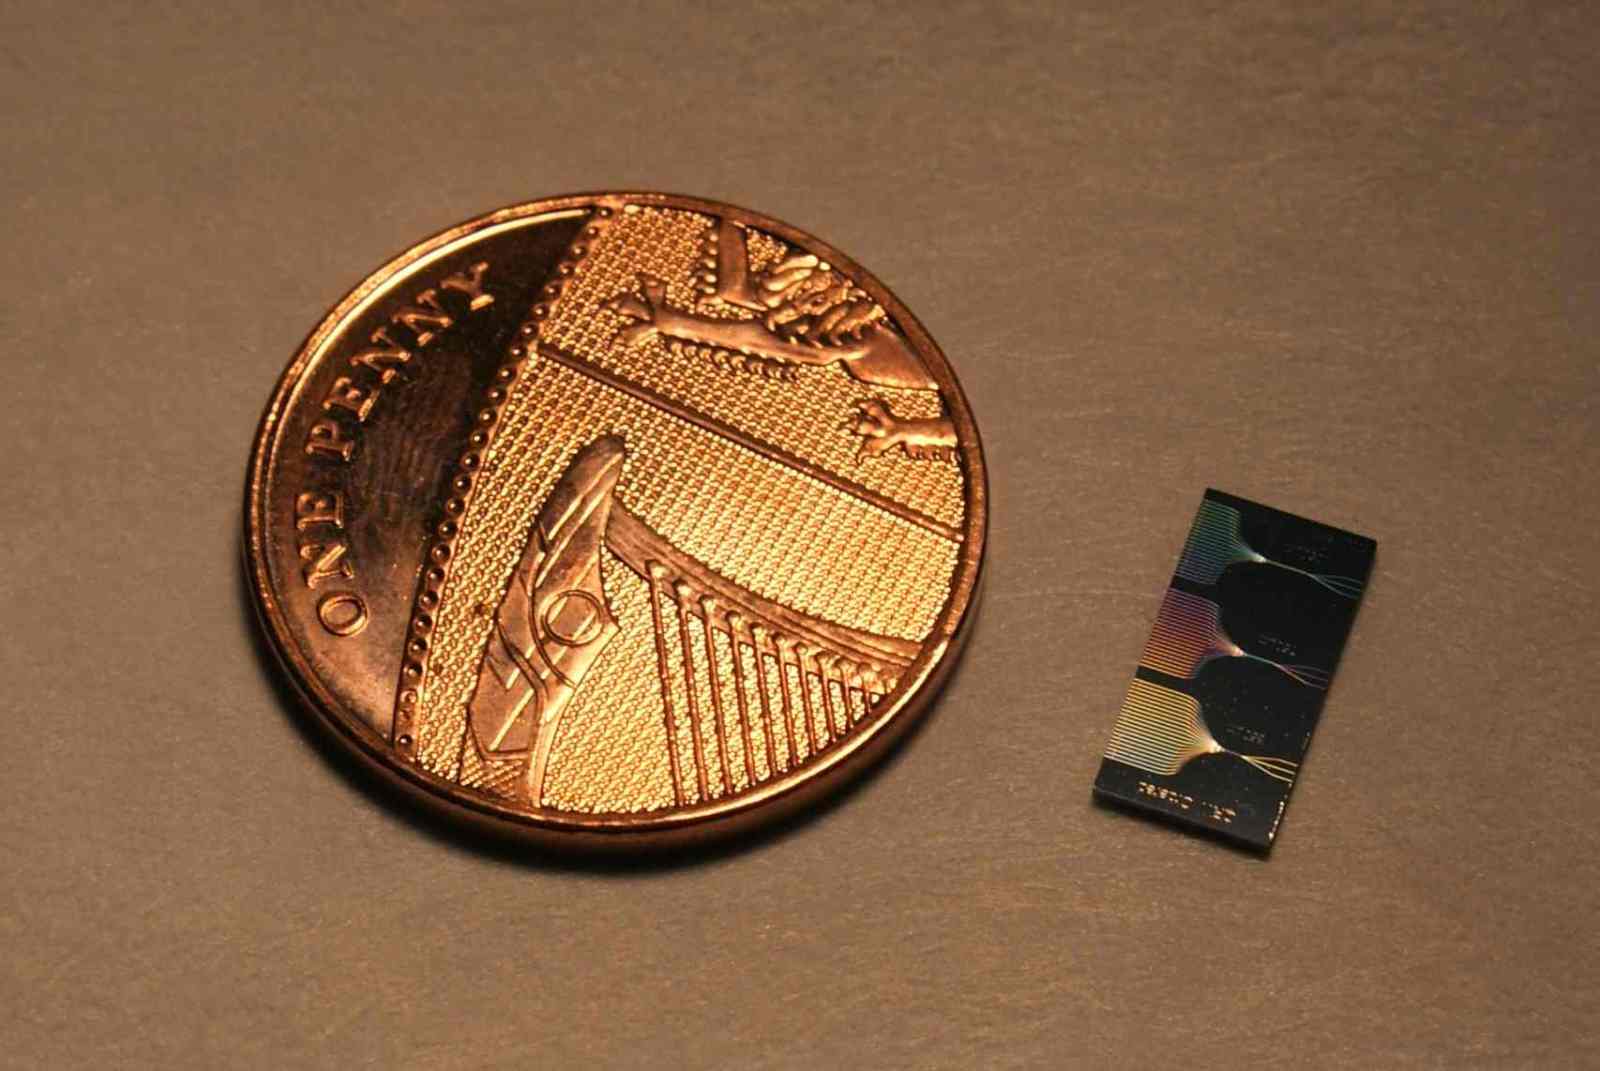 The photonic chip next to a UK penny